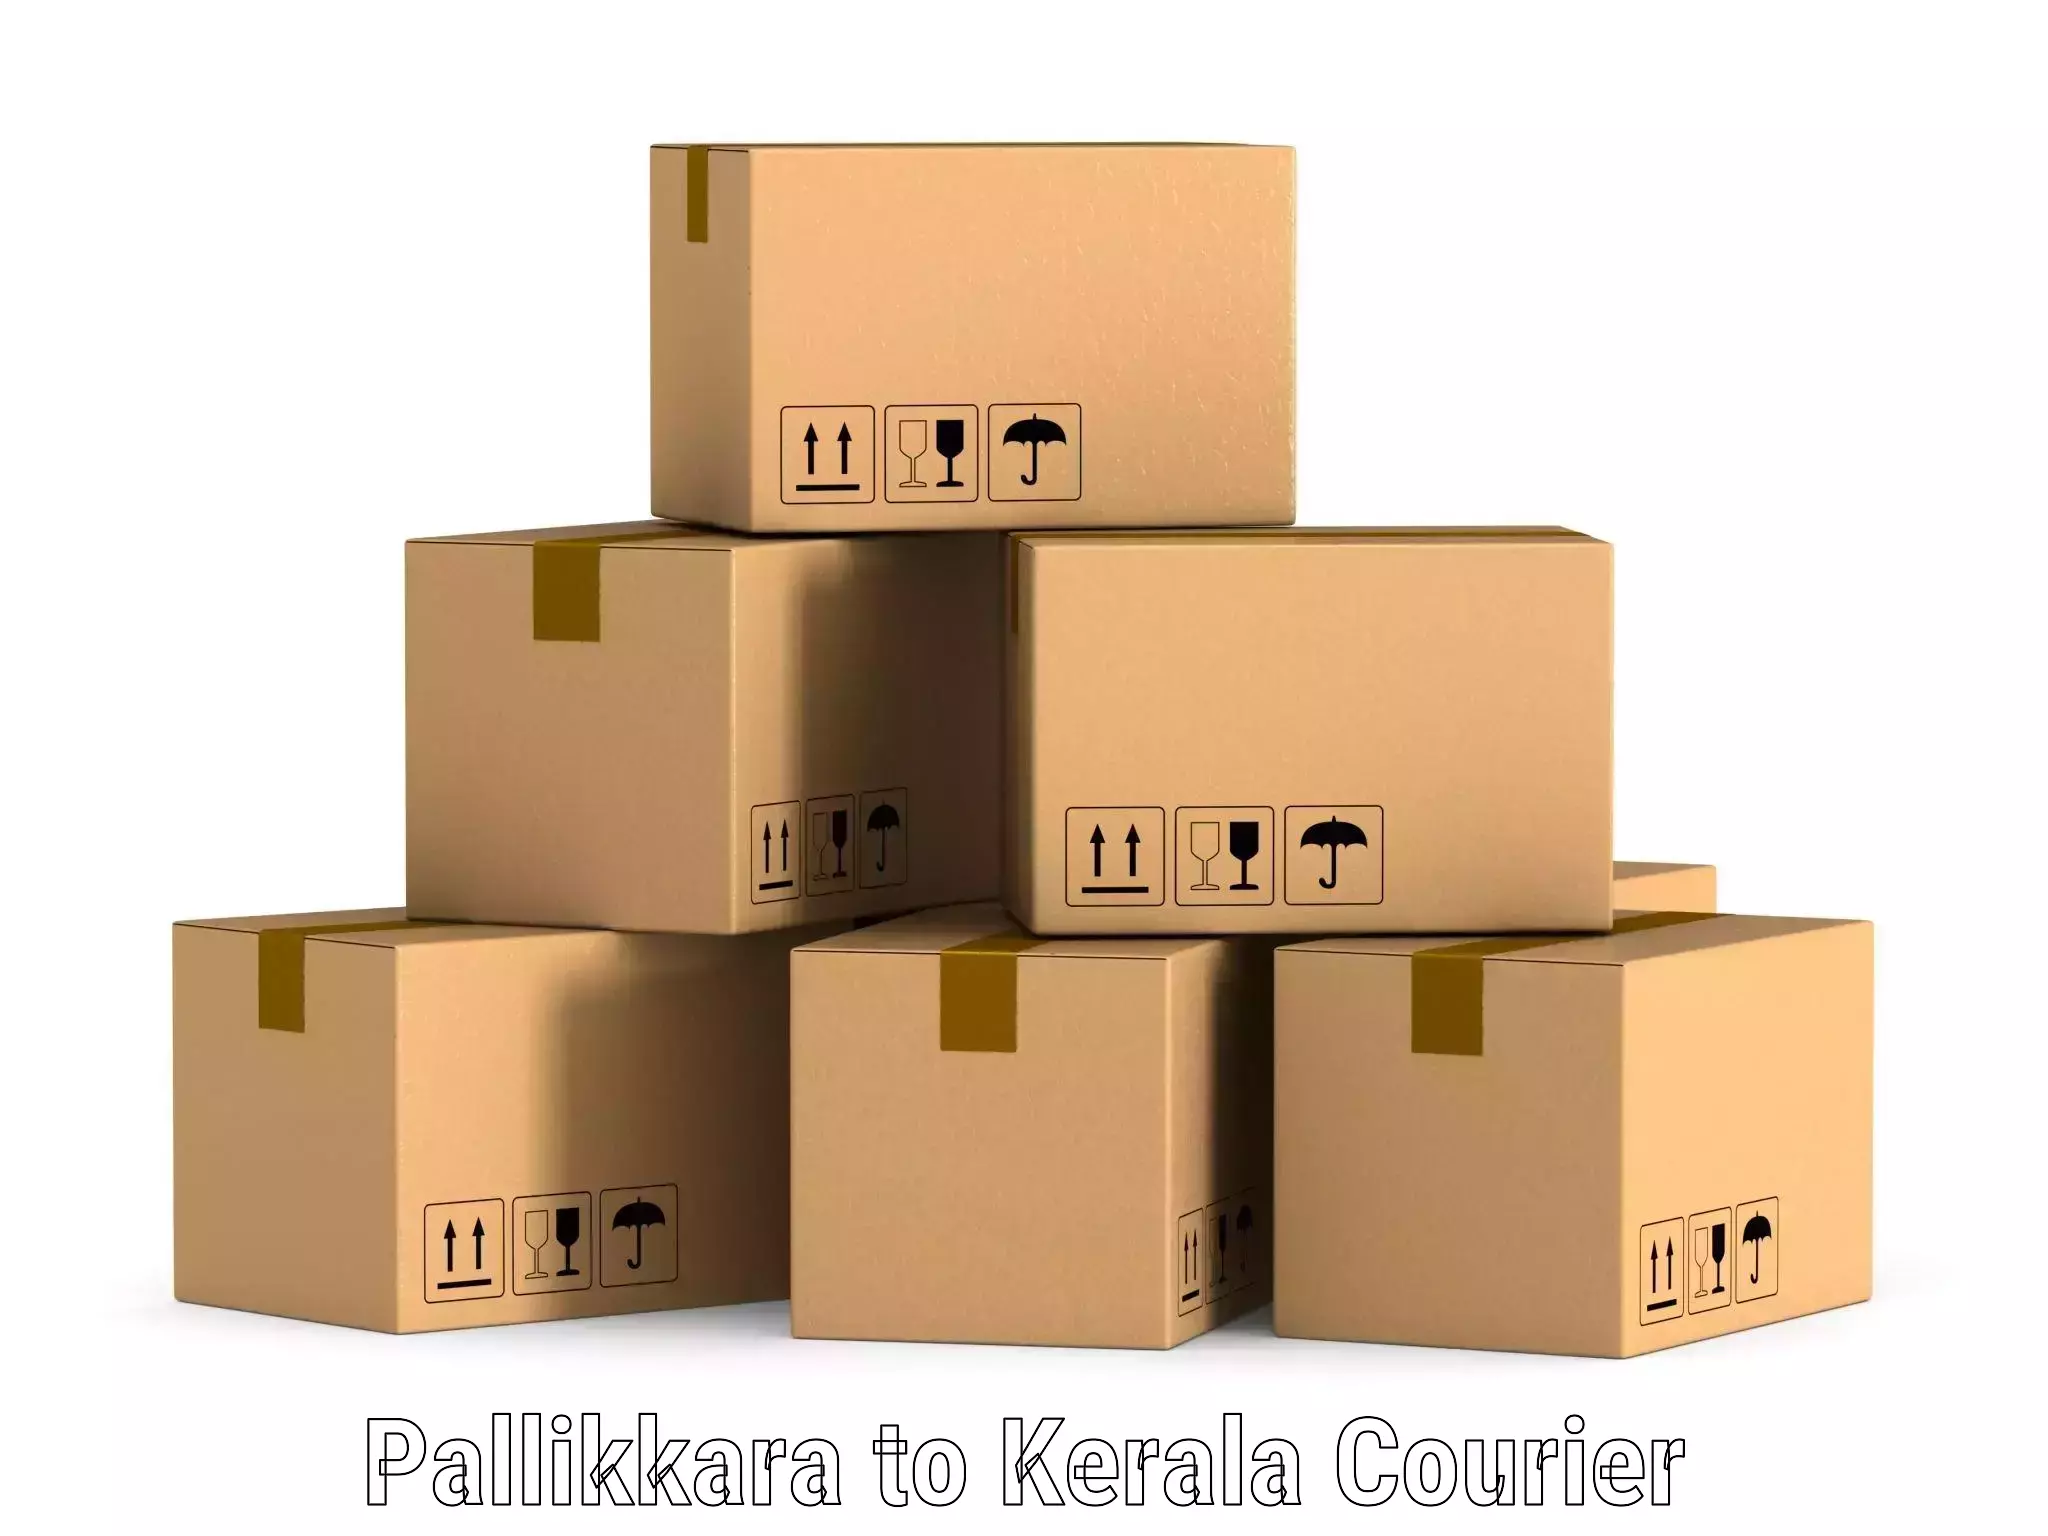 End-to-end delivery in Pallikkara to Chingavanam